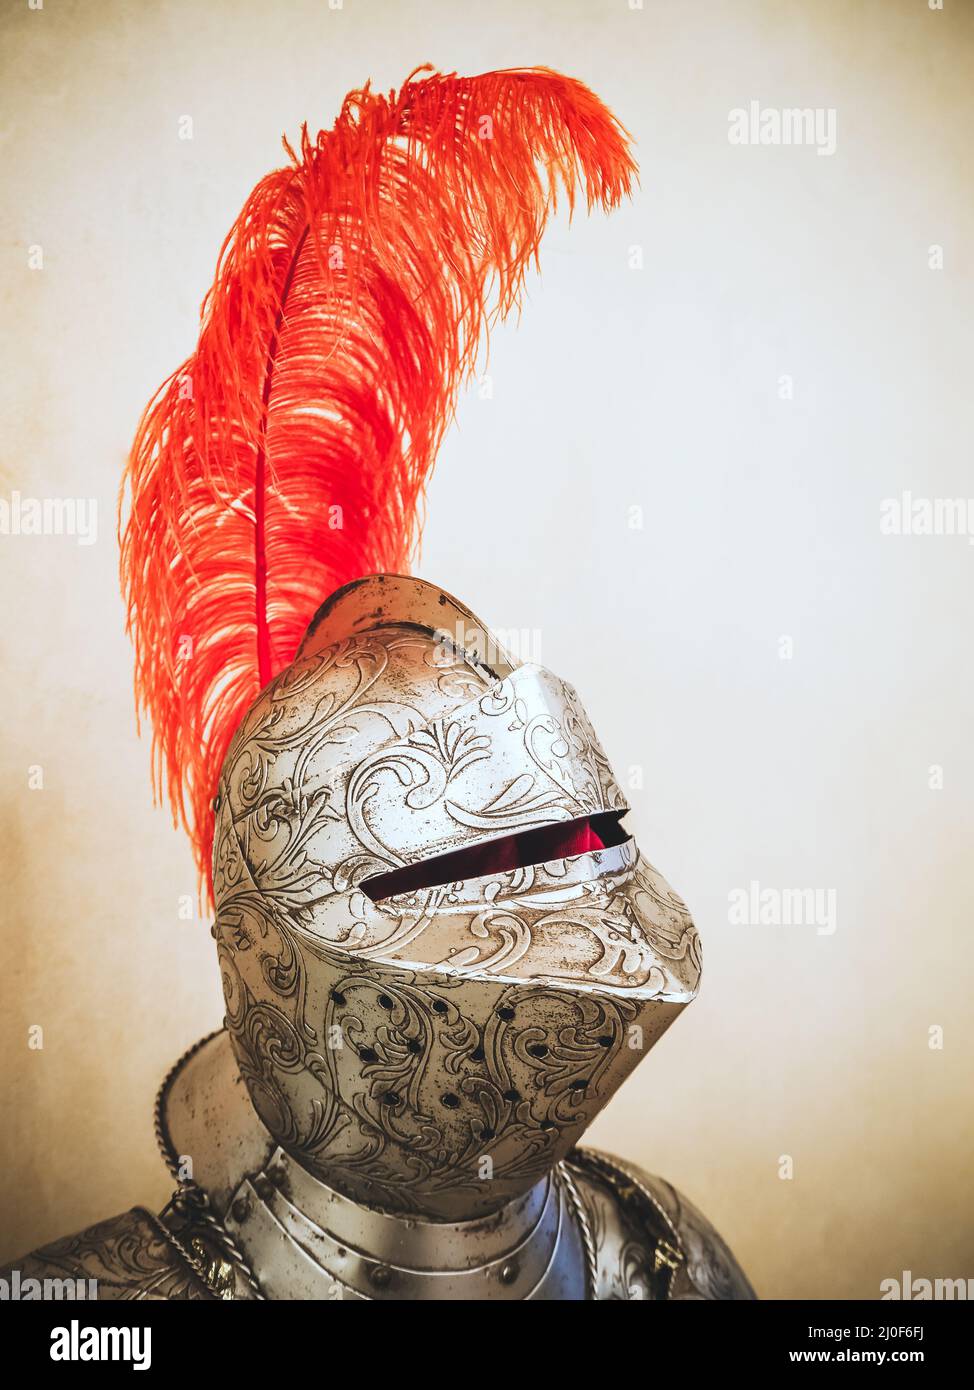 Russia, Sochi 14.03.2020. A medieval knight's metal helmet with patterned chasing and a long ostrich red feather Stock Photo